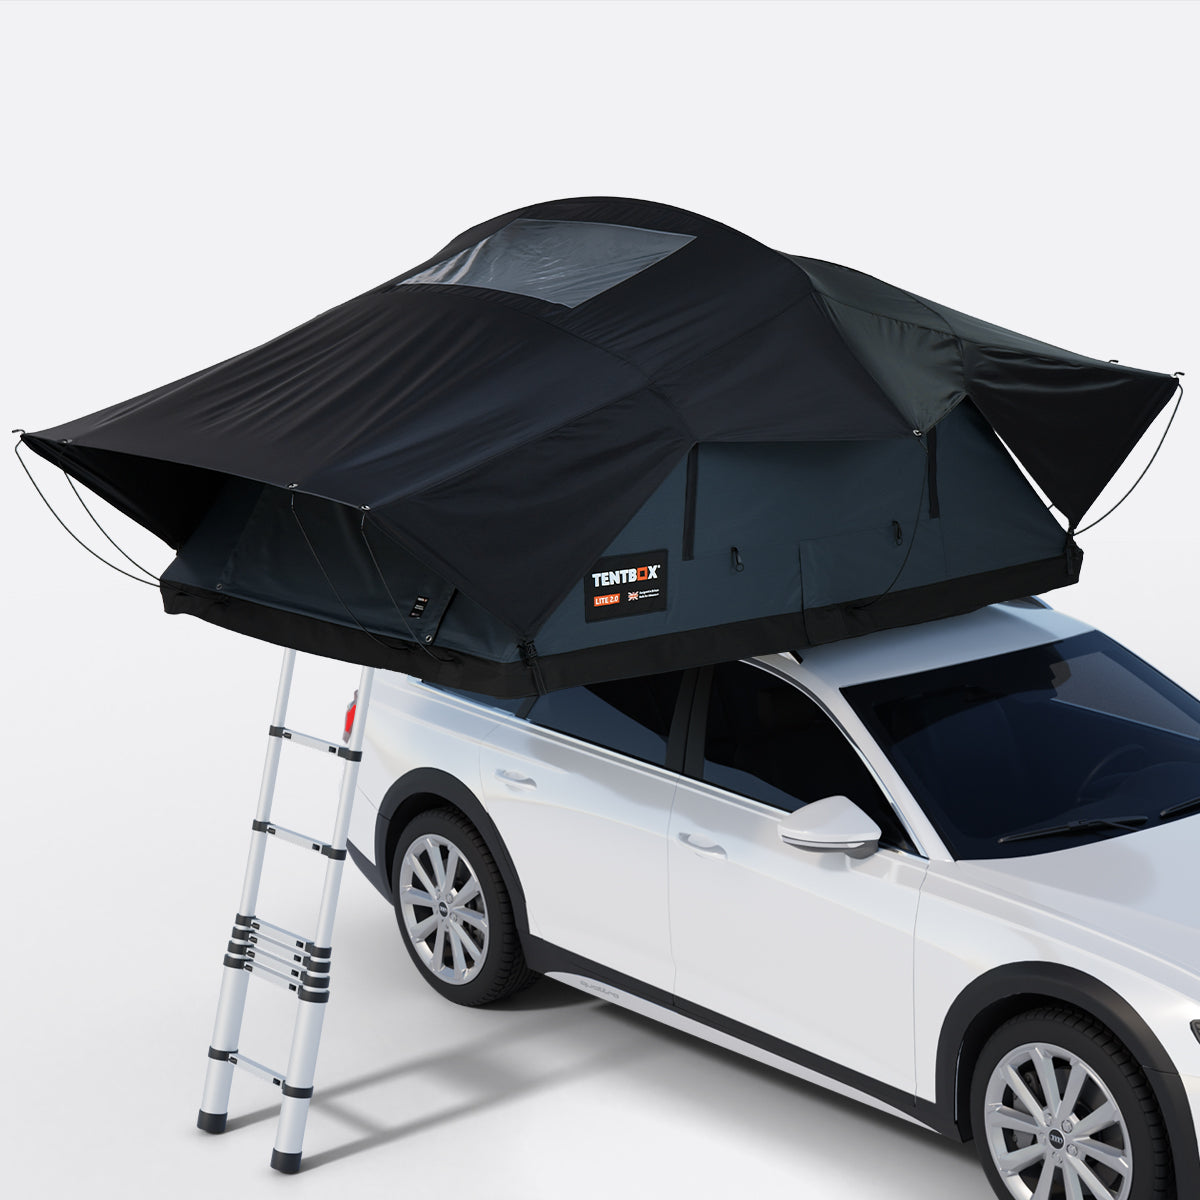 TentBox Lite XL - Large Family Roof Tent for 4 people 